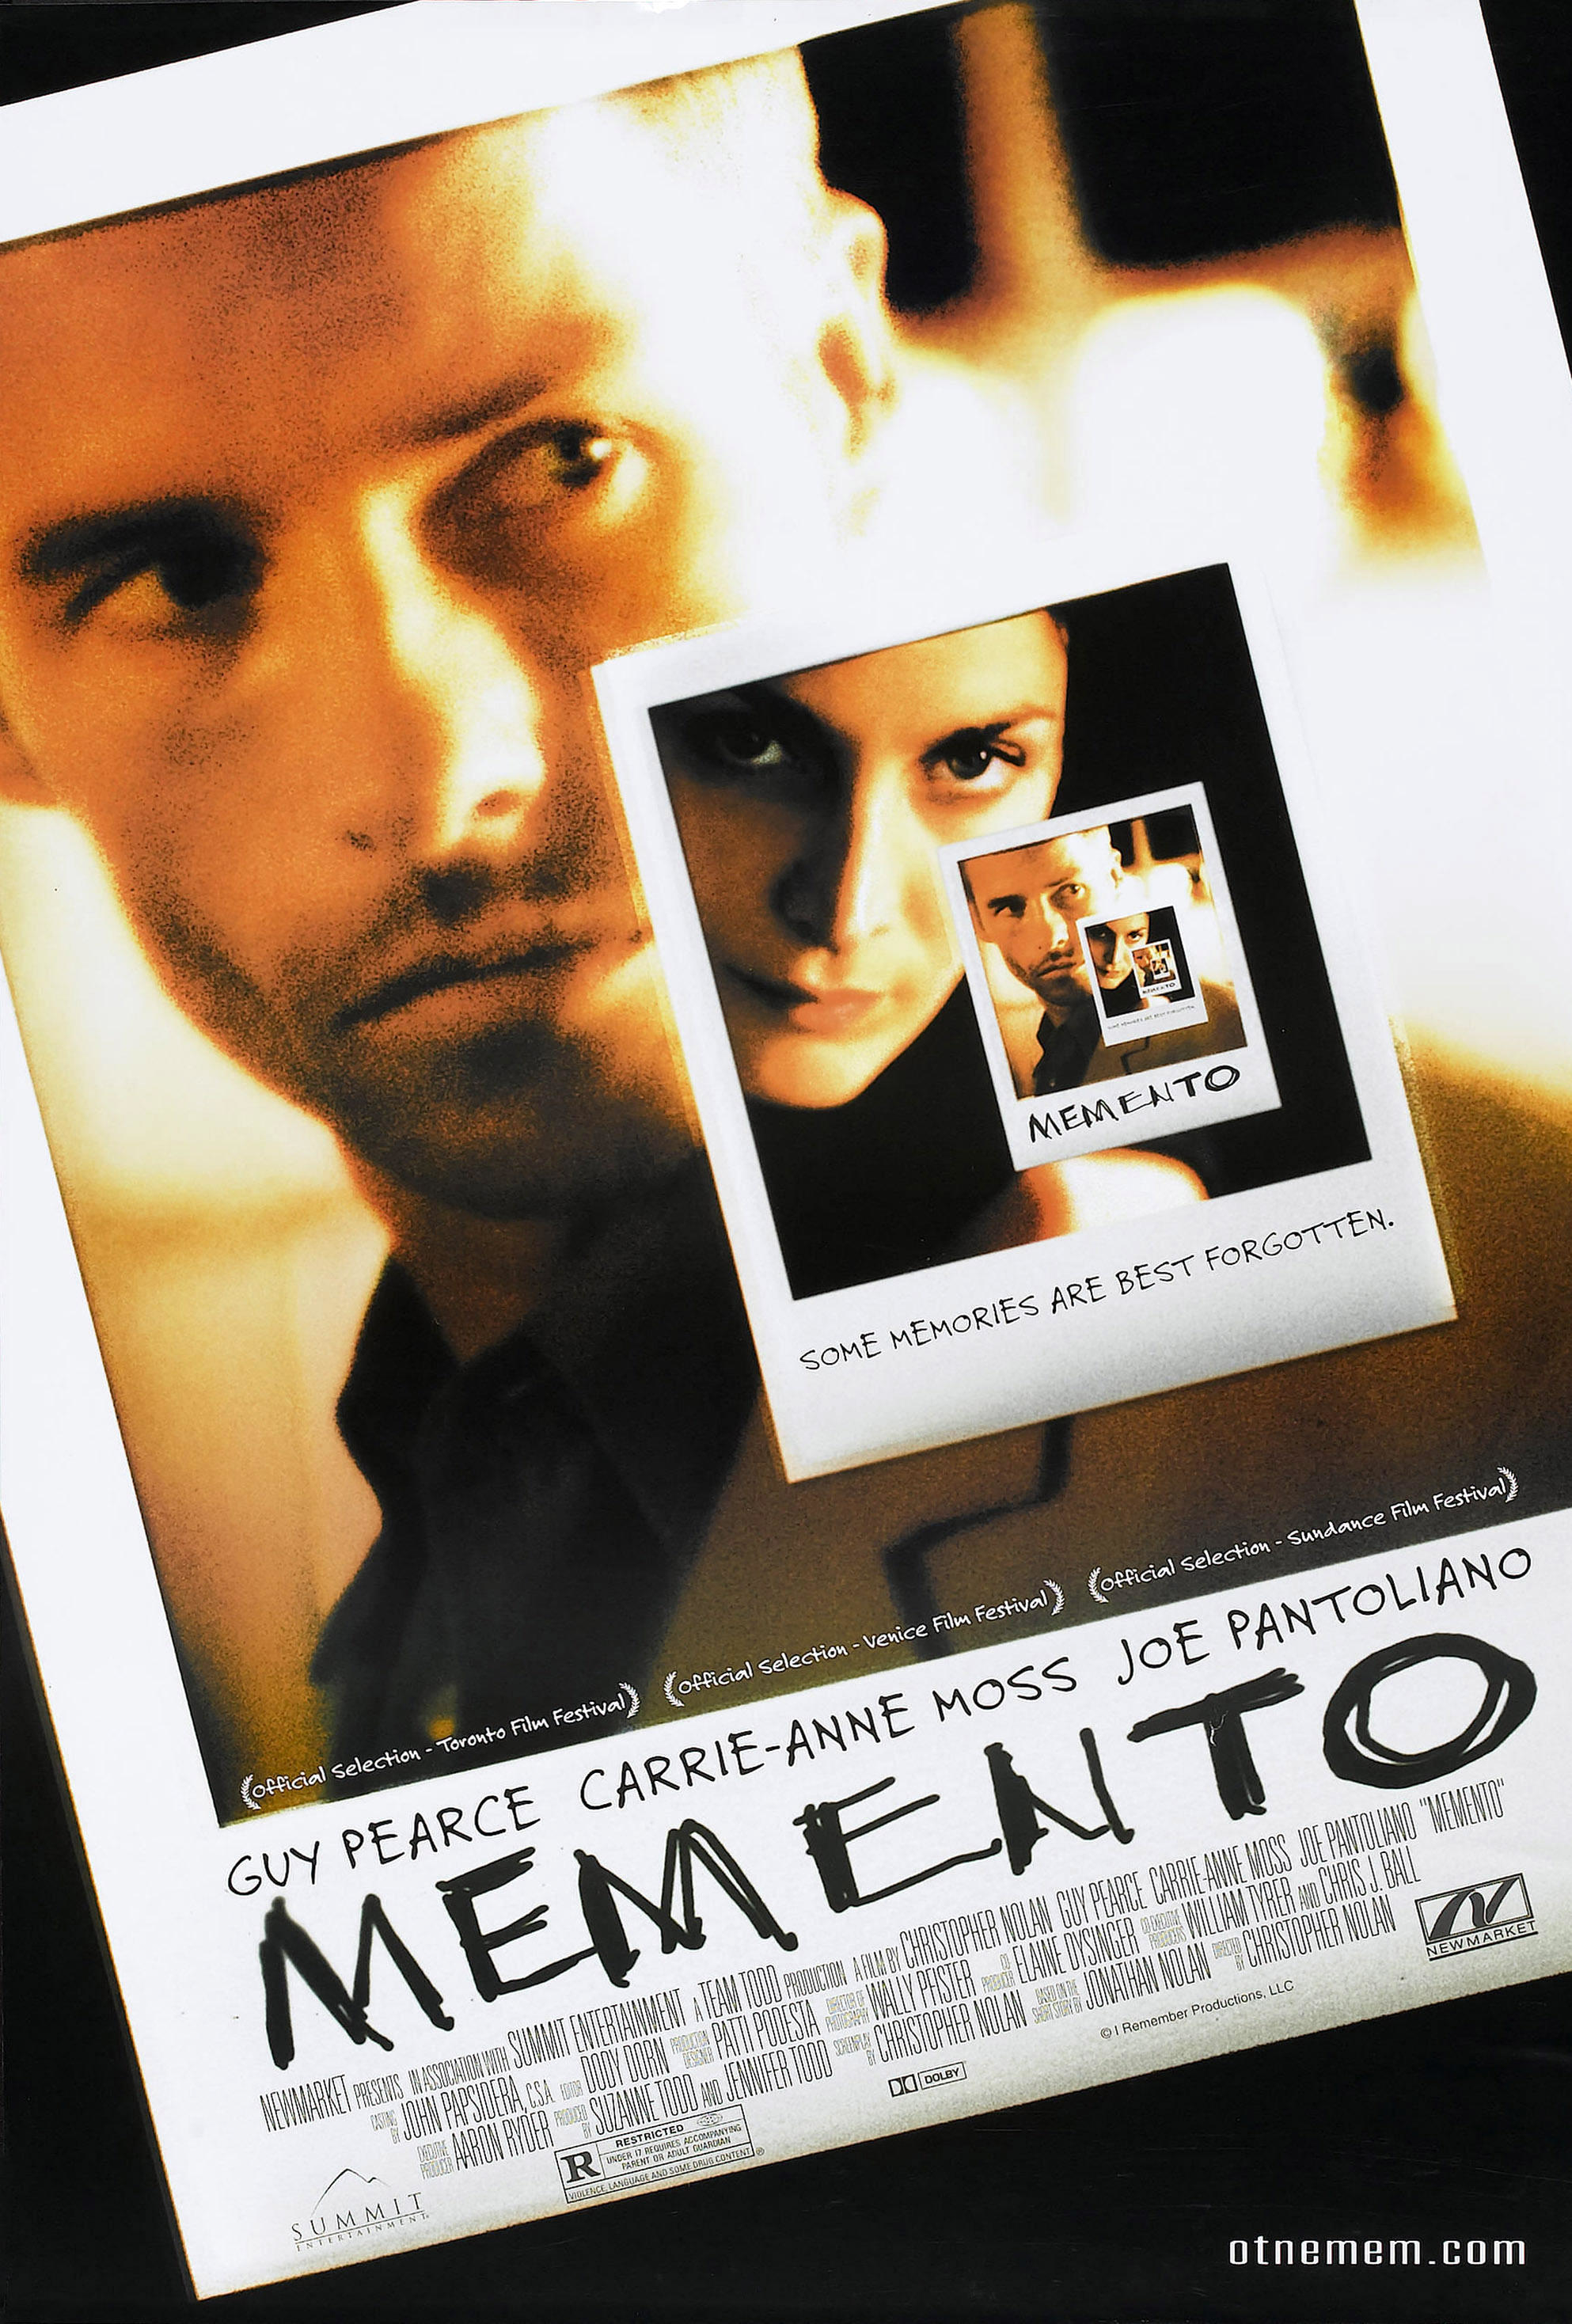 The Memento movie poster features Guy Pearce and Carrie-Anne Moss on Polaroid photos.